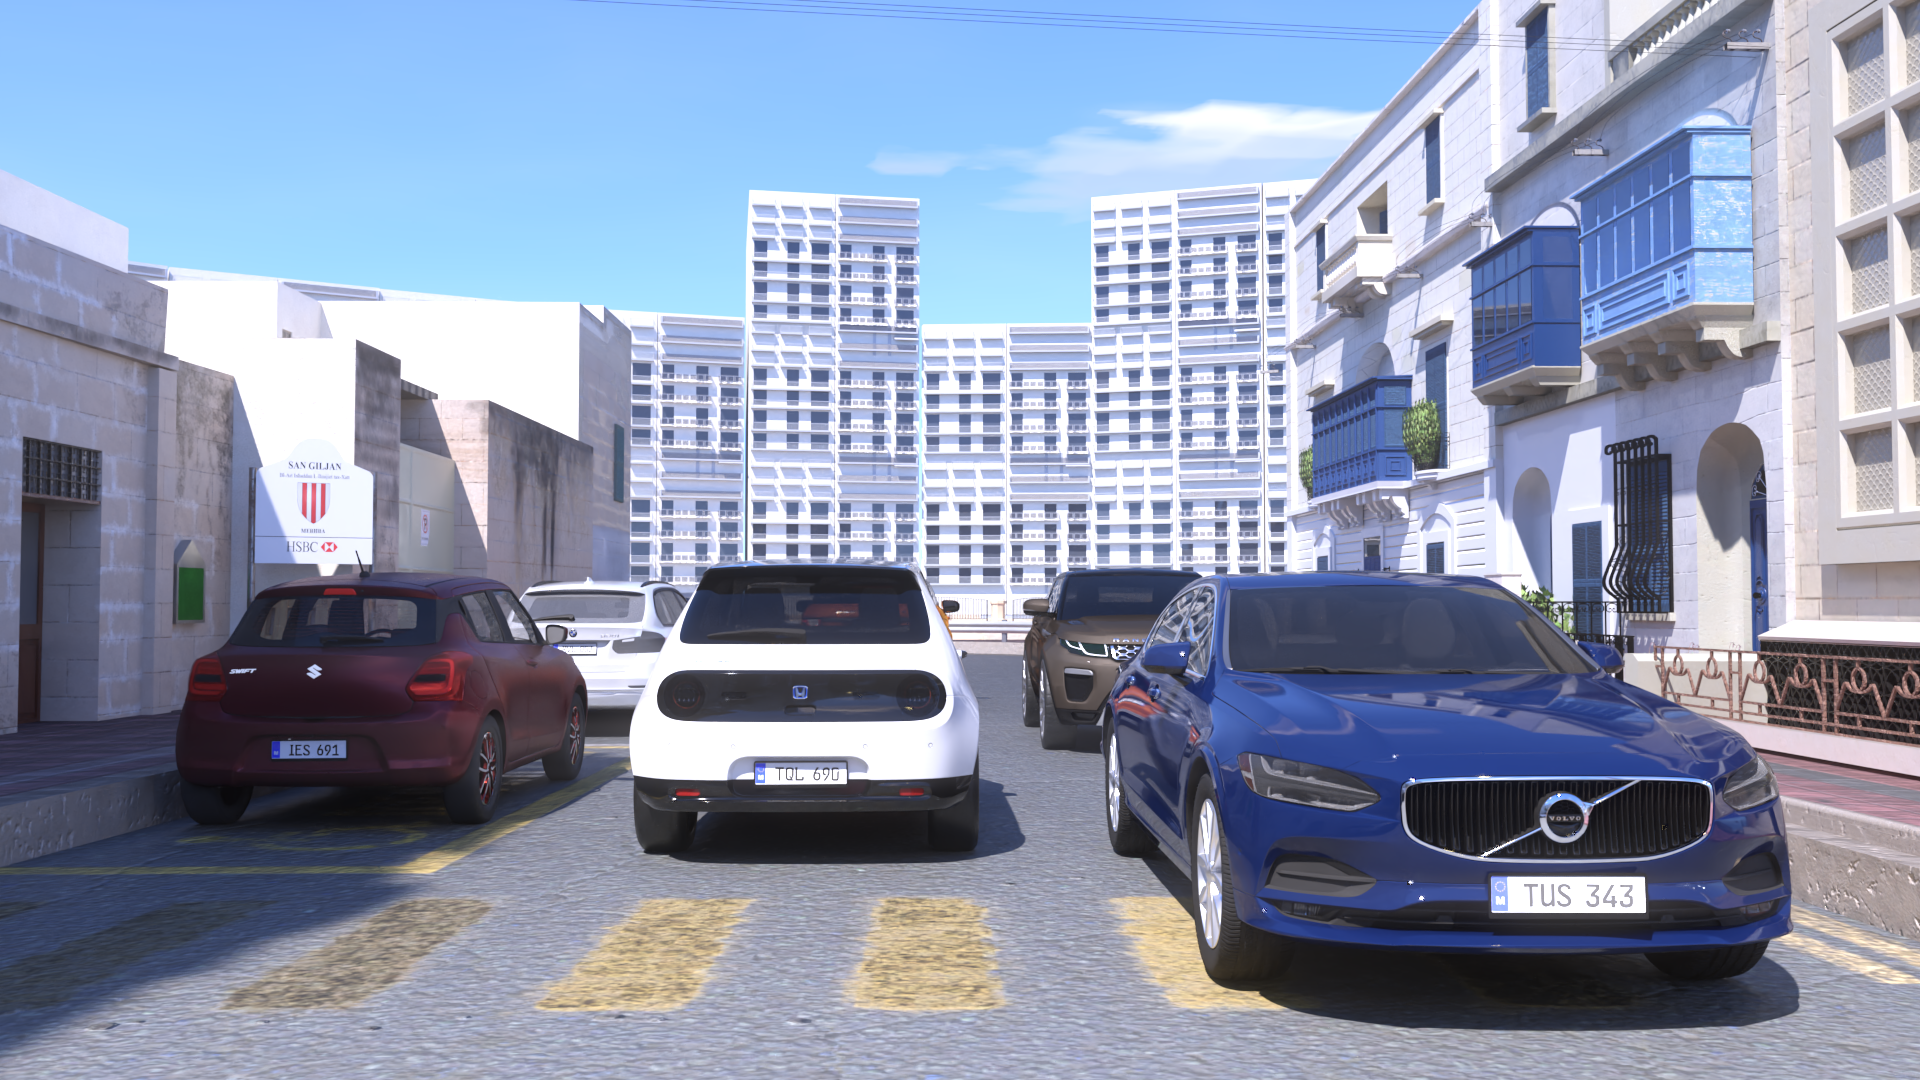 A 3D scene in NVIDIA Omniverse featuring synthetically generated vehicles for training license plate detection models.
